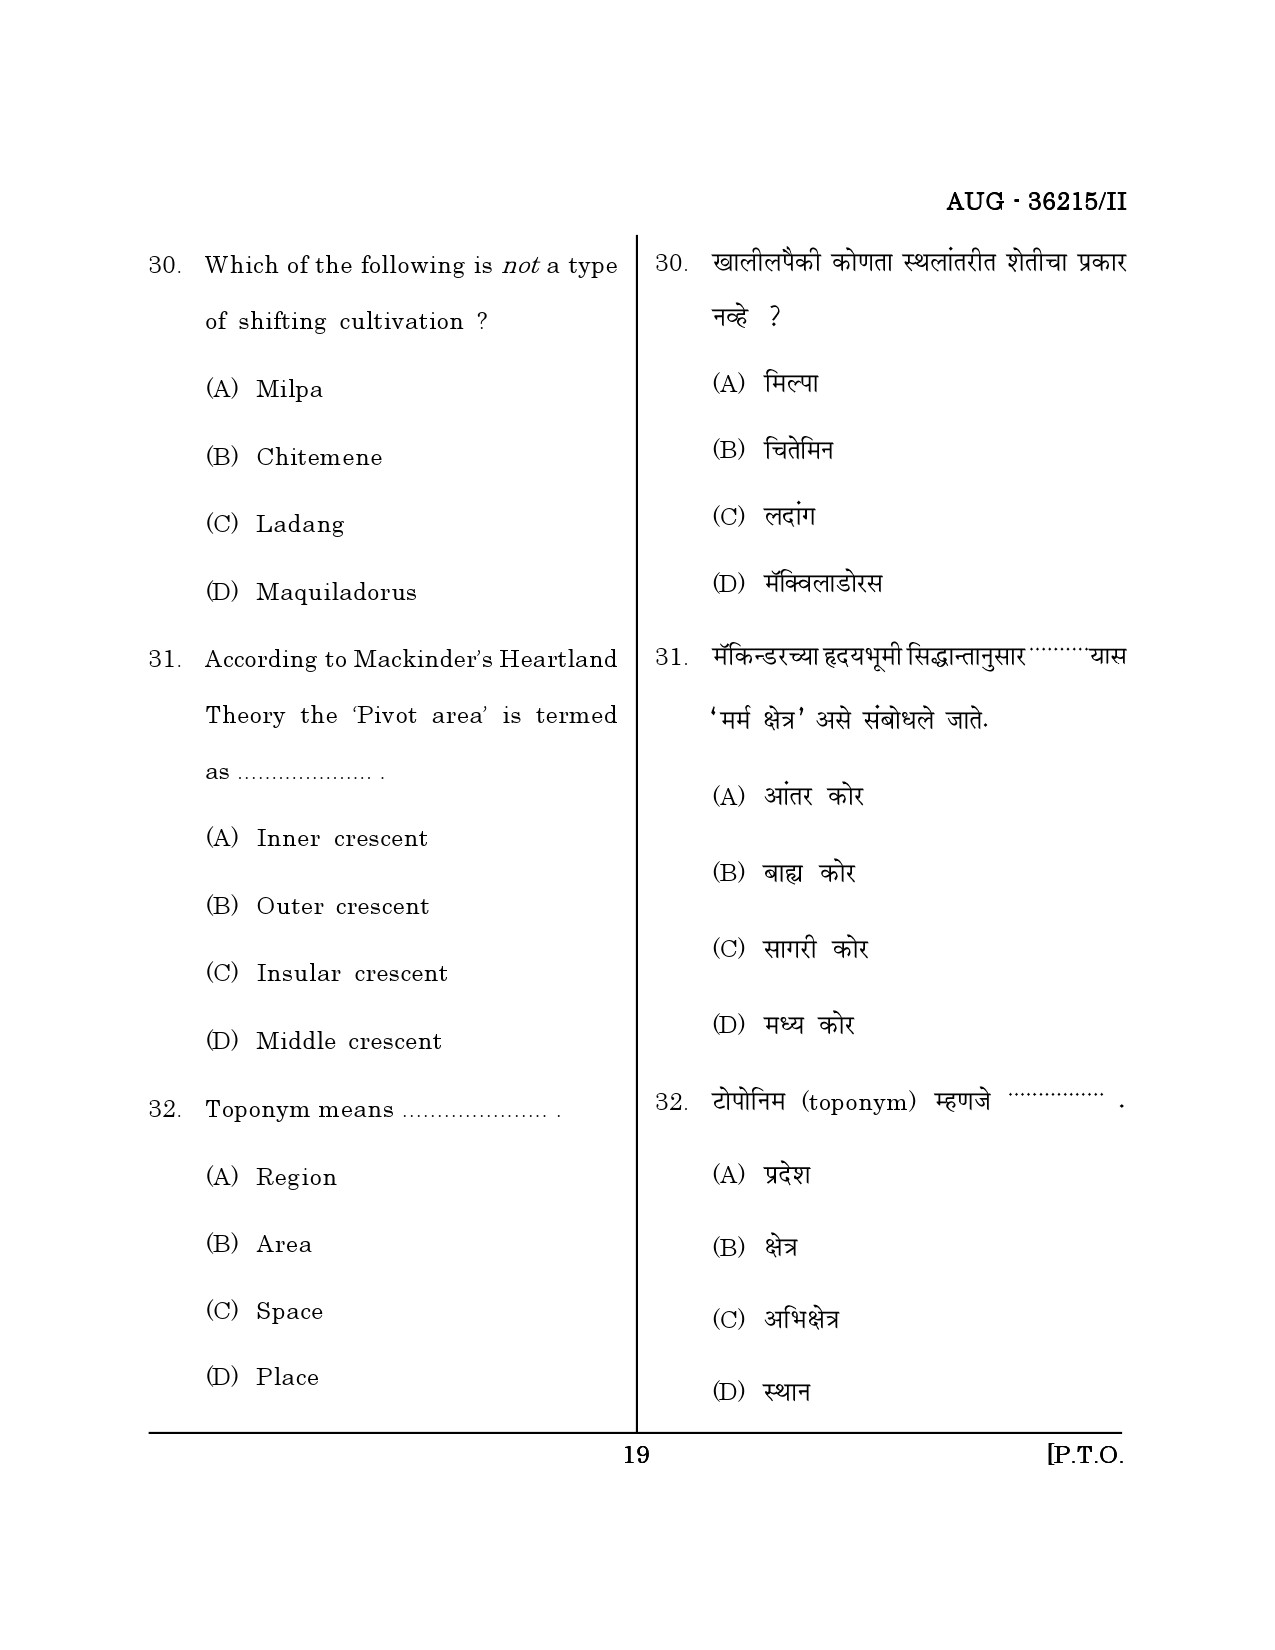 Maharashtra SET Geography Question Paper II August 2015 18